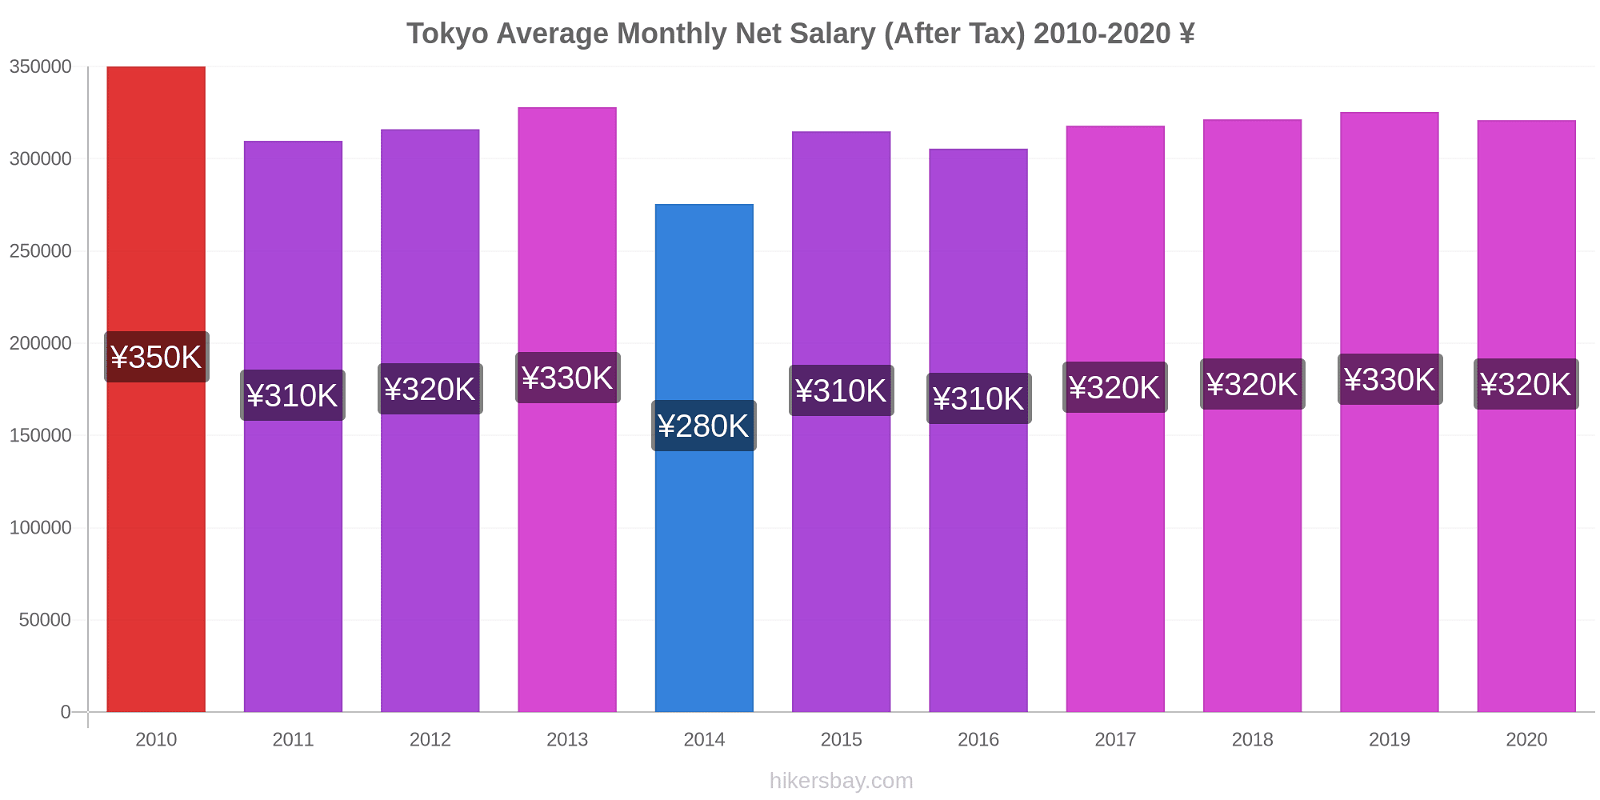 Tokyo price changes Average Monthly Net Salary (After Tax) hikersbay.com